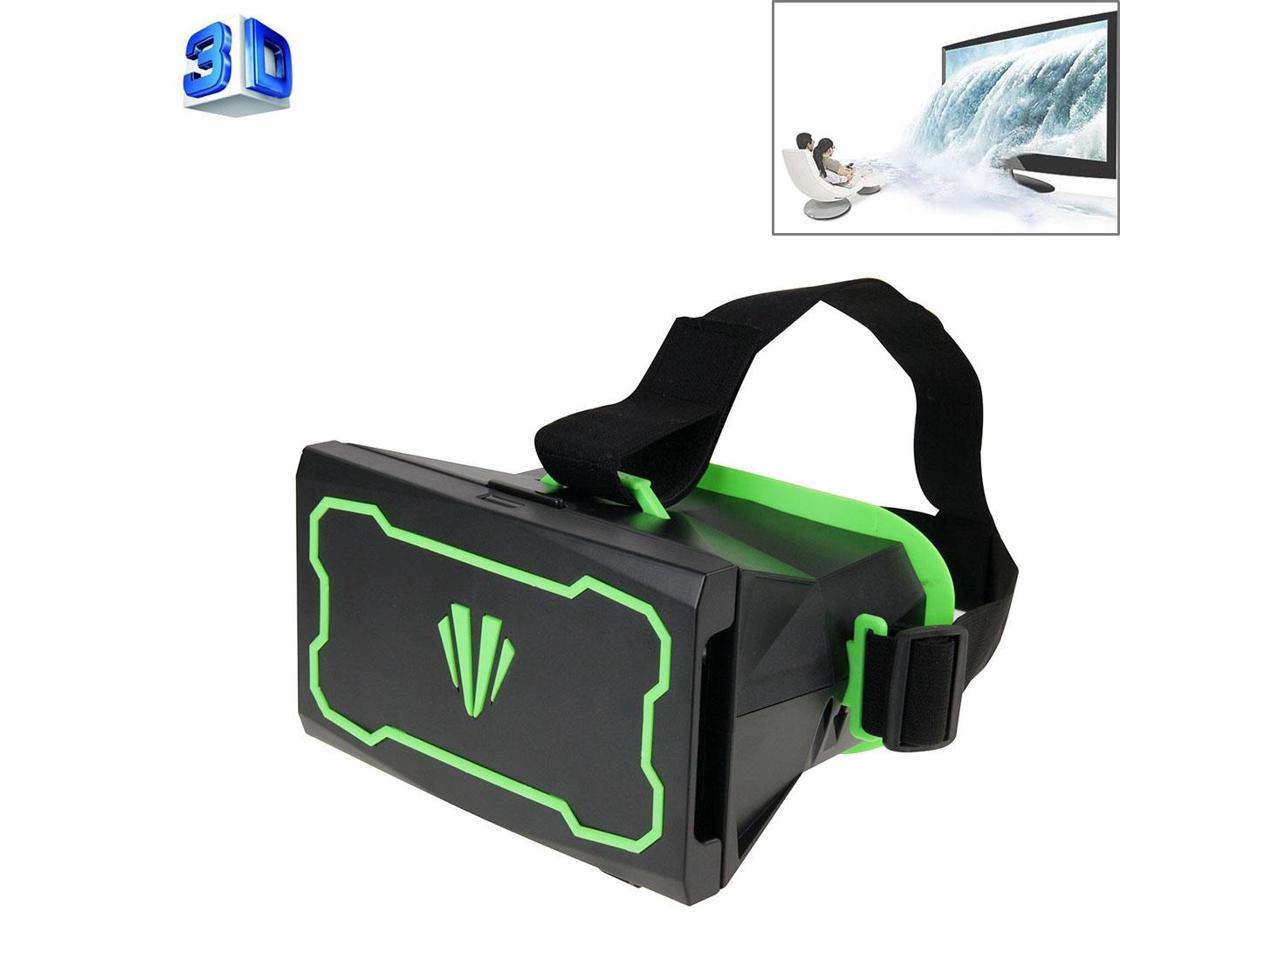 Universal Virtual Reality 3D Video Glasses for 3.5 to 6 inch Smartphones